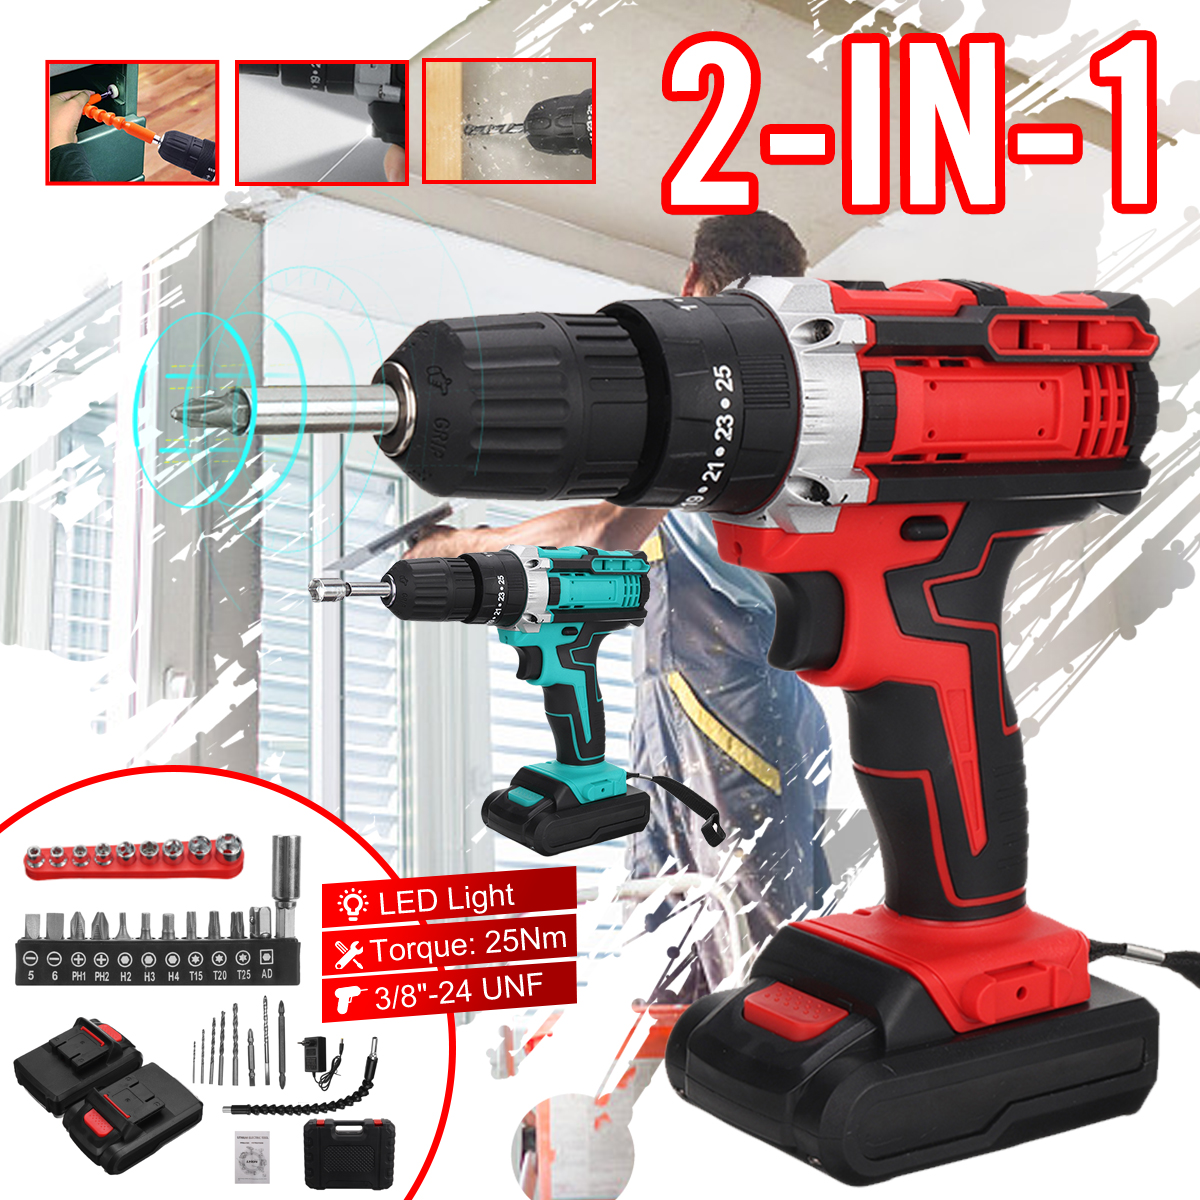 Cordless-Rechargeable-Electric-Drill-Screwdriver-LED-Portable-Metal-Wood-Drilling-Tool-W-12pcs-Batte-1848724-1